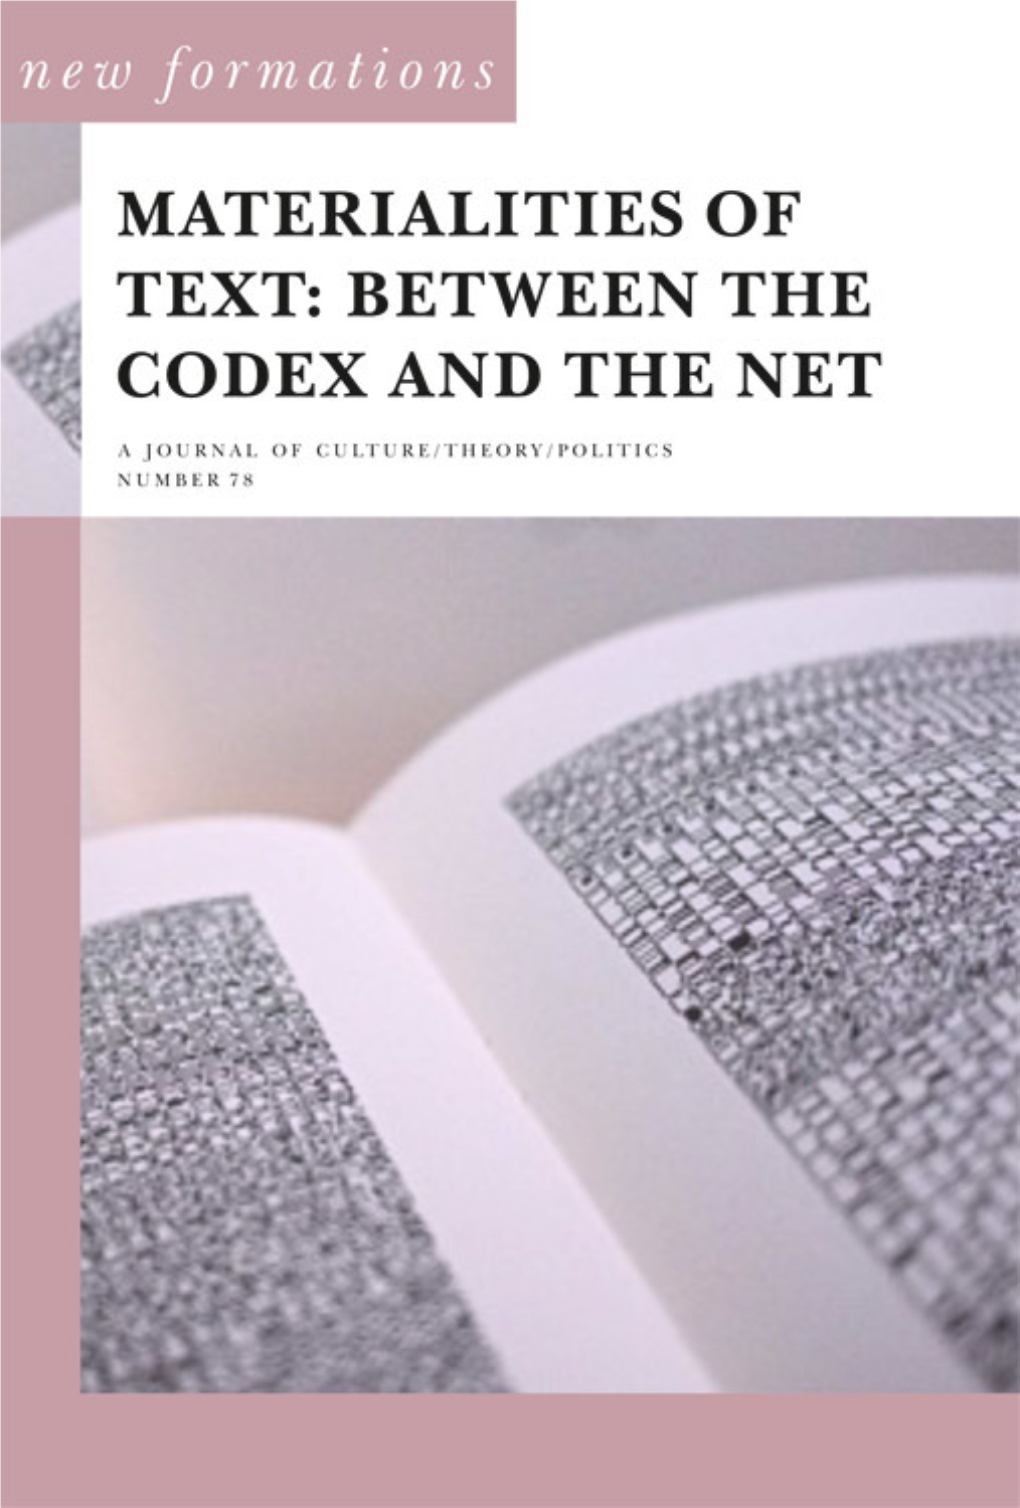 Materialities of Text: Between the Codex and the Net